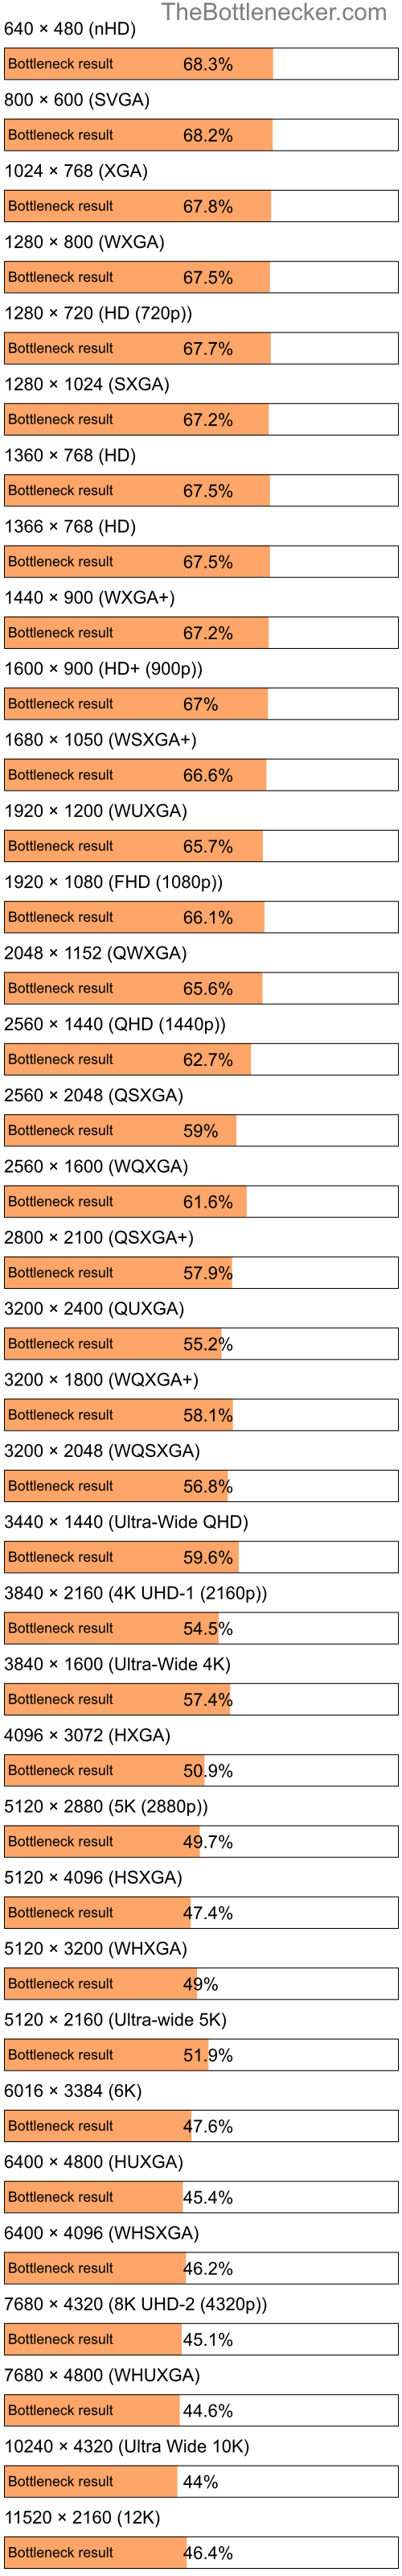 Bottleneck results by resolution for AMD Phenom 9850 and NVIDIA GeForce RTX 2060 in General Tasks